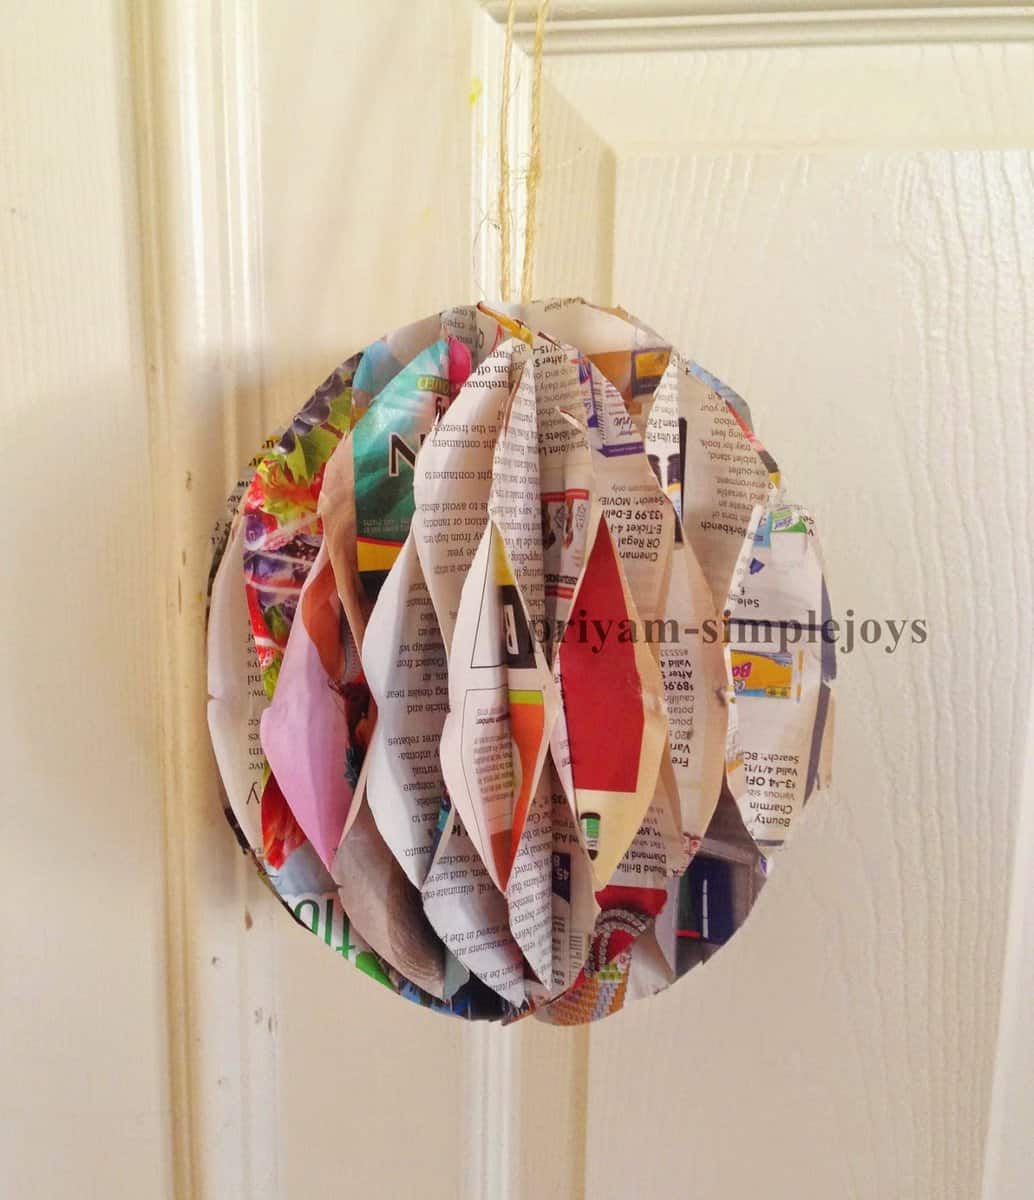 7 Easy Upcycled Projects for Adults - The Crafty Blog Stalker